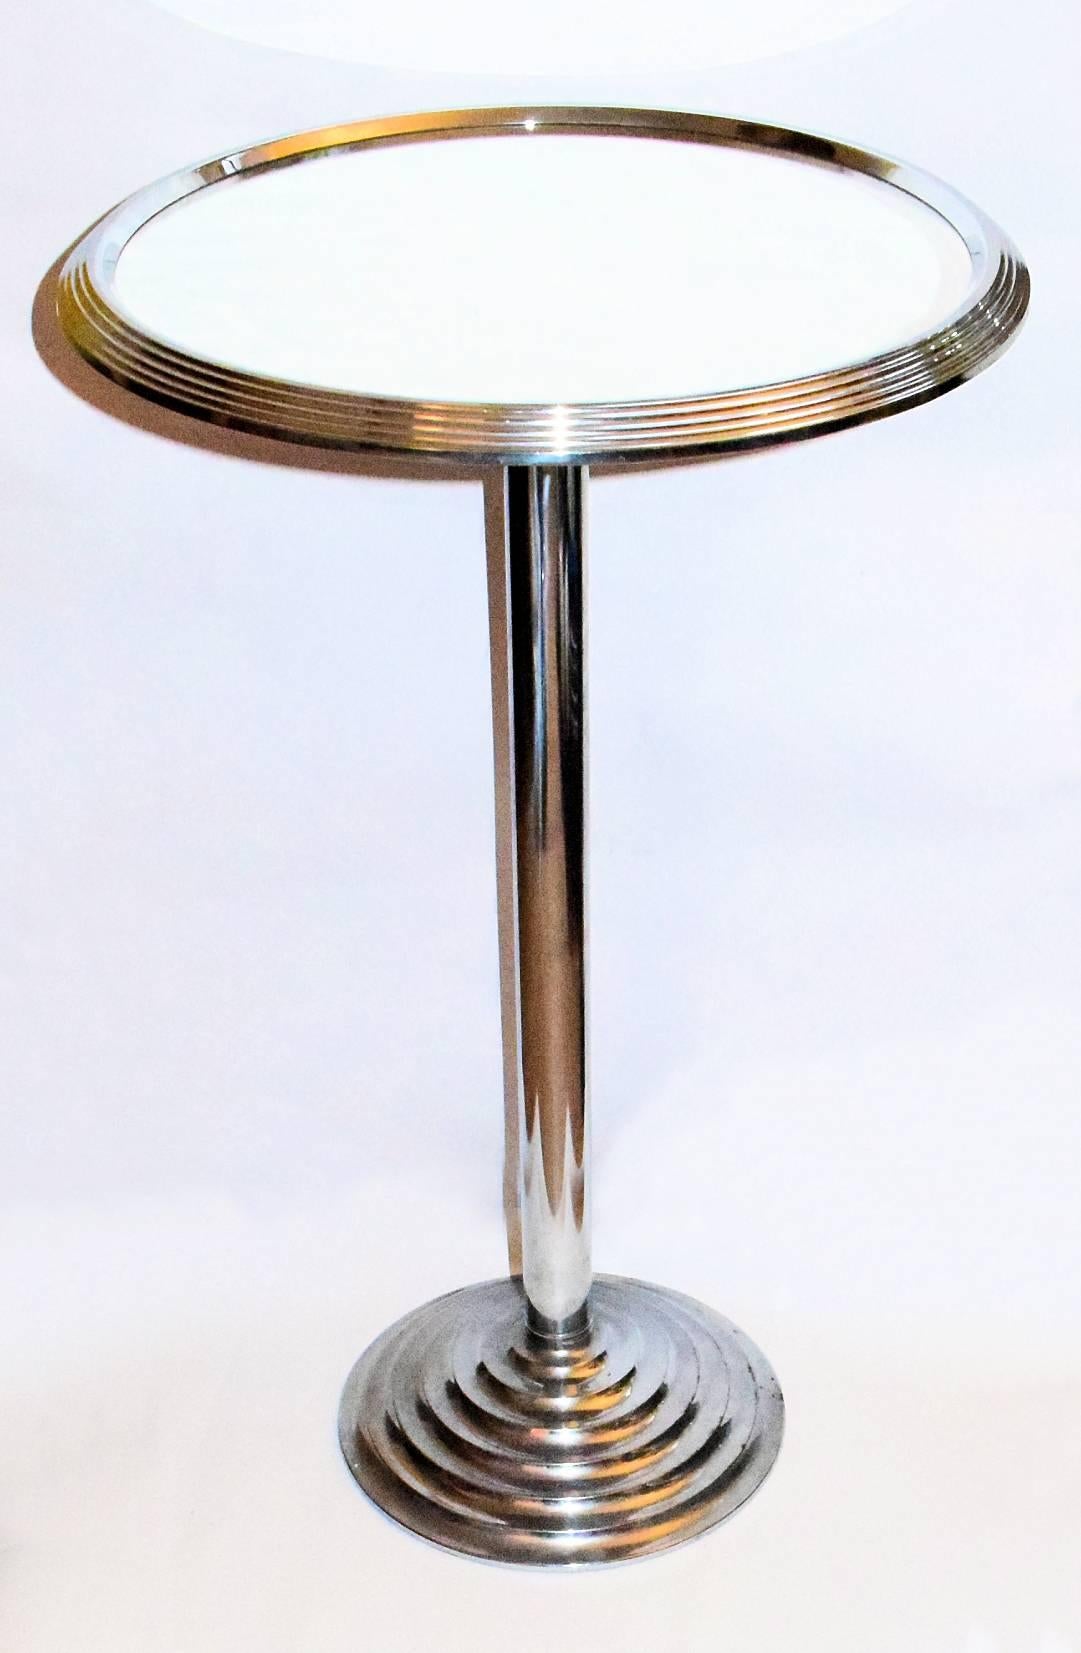 Dating to the 1930s is this fabulously glamourous mirror top table. Originating from France this table is in great condition. The top and base have stepped chrome edges and the stem is chrome. The underside of the top is wood and the underside of